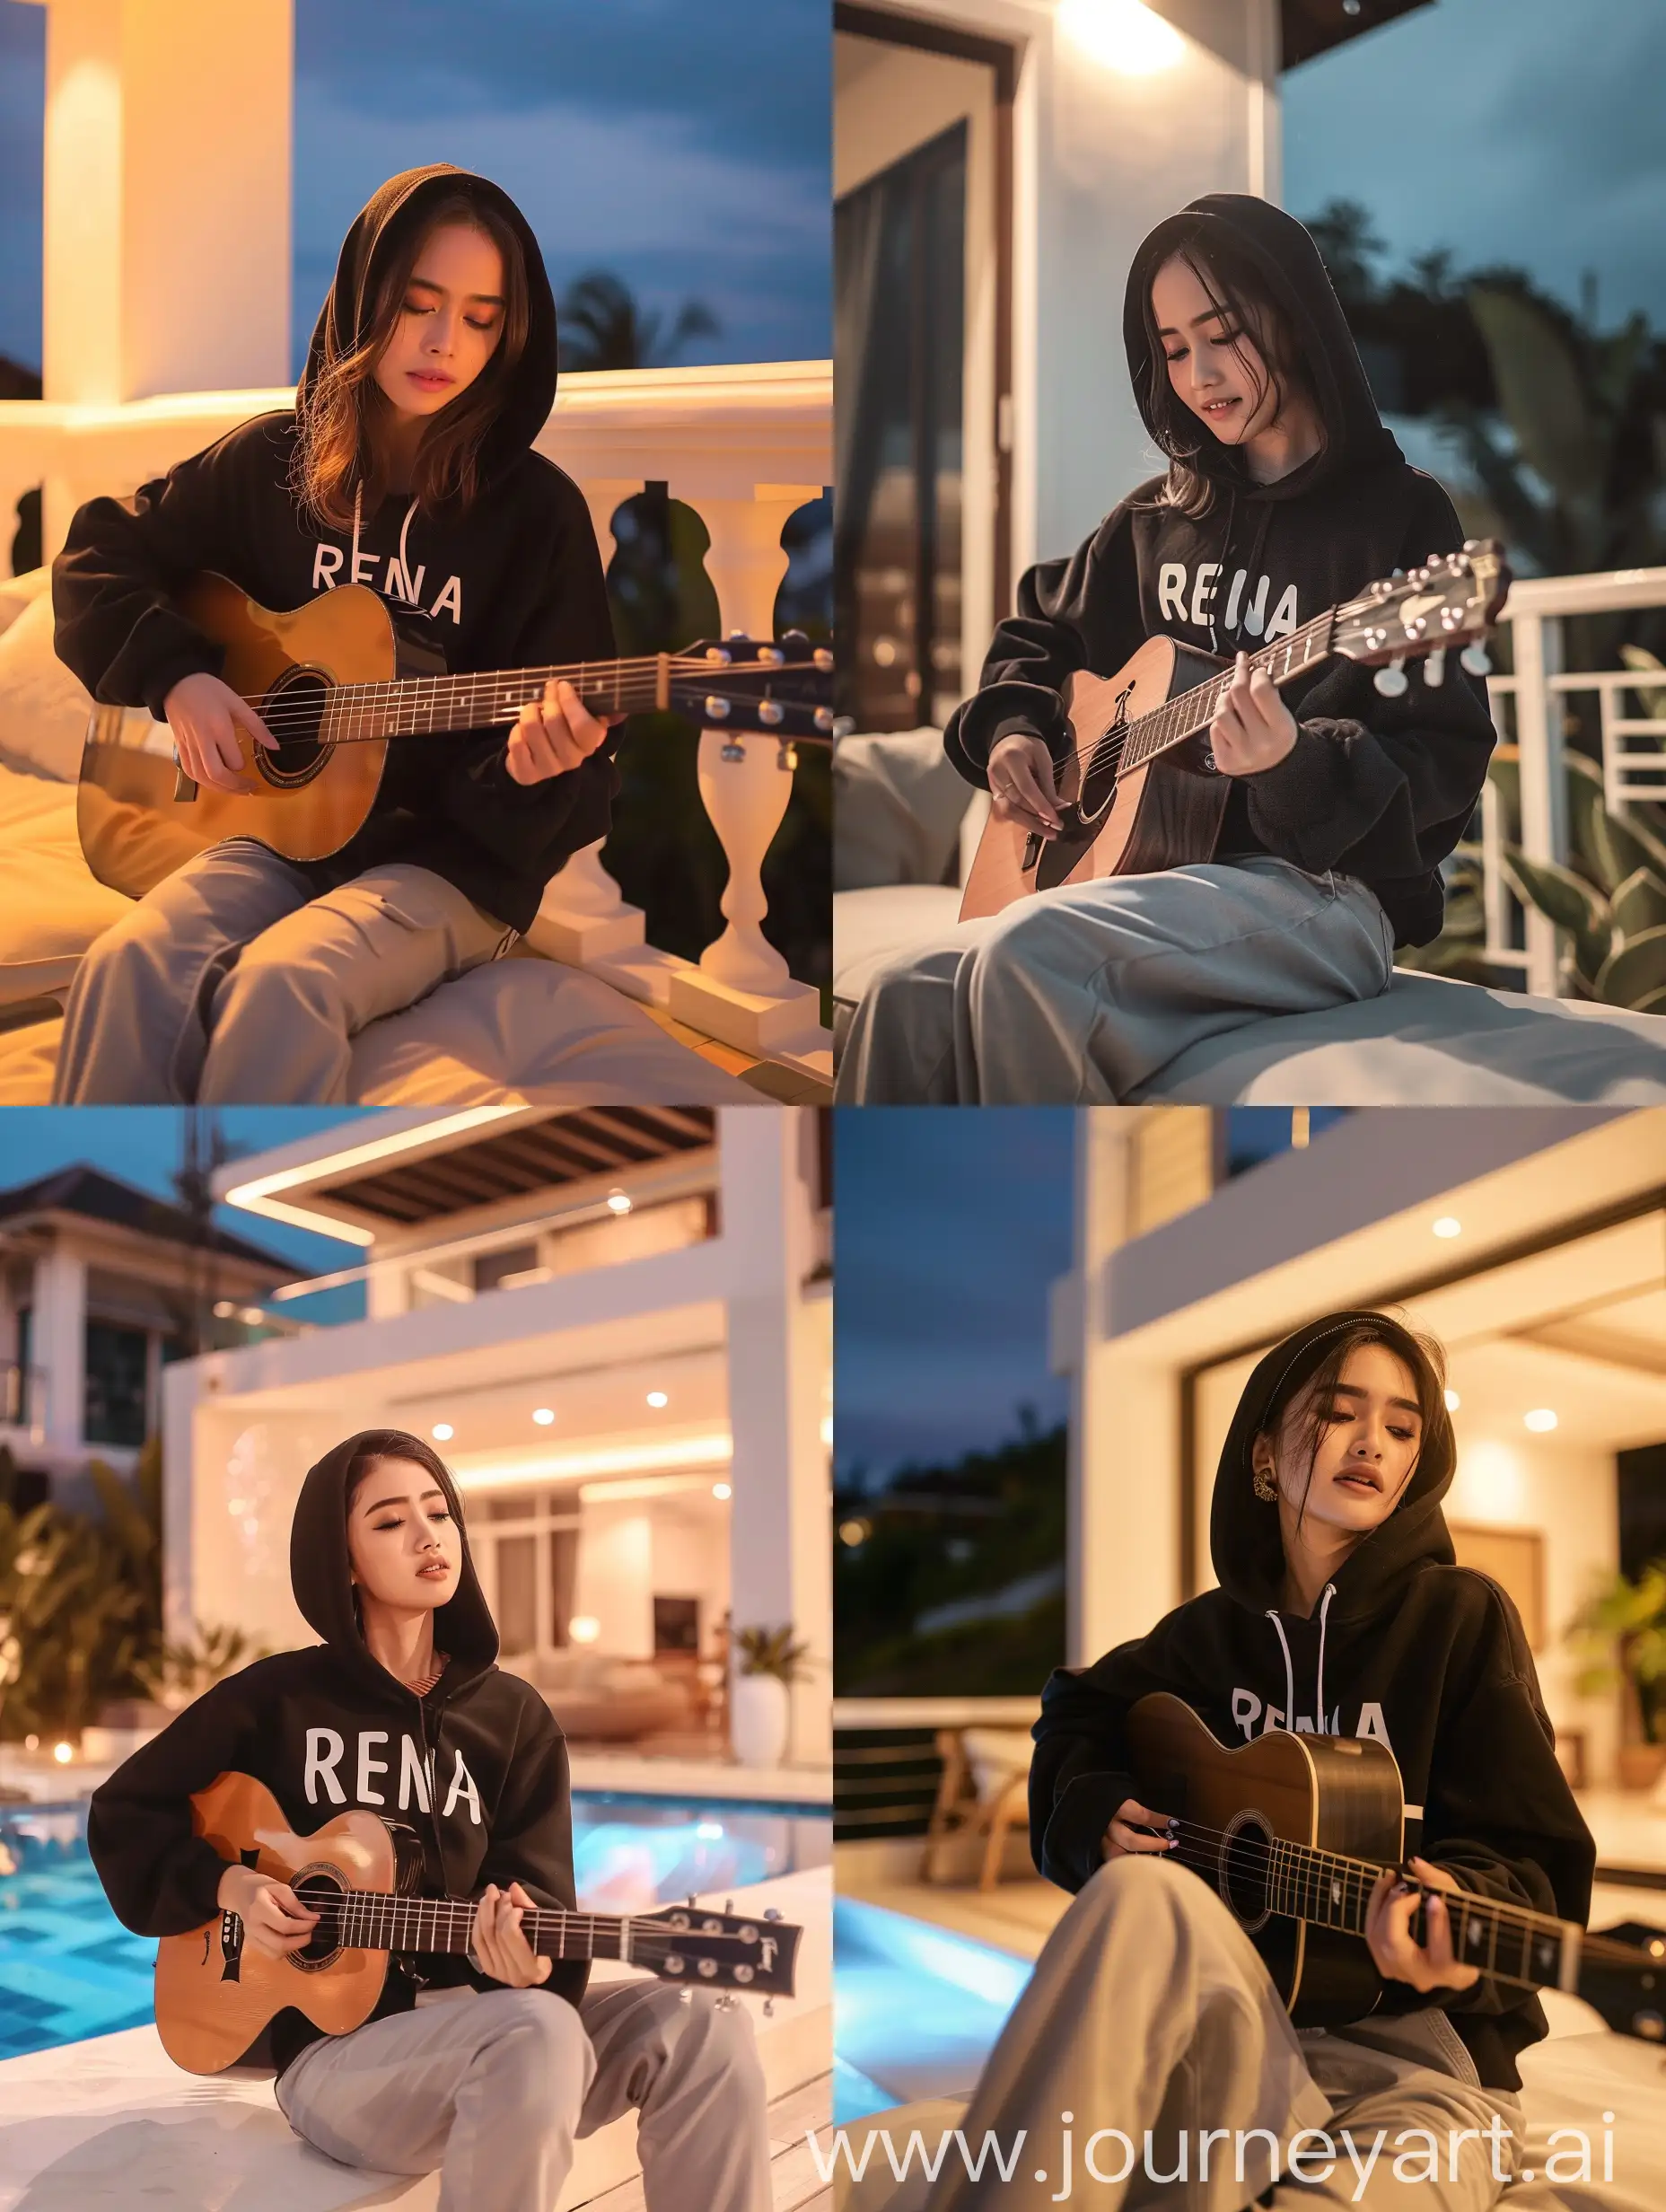 Original and authentic photo of a beautiful 20 year old Indonesian woman, wearing a black hoodie with the word RENA, light gray trousers, sitting on the terrace of a luxury house while playing the guitar, photo quality HD 16k resolution clear and bright at night.